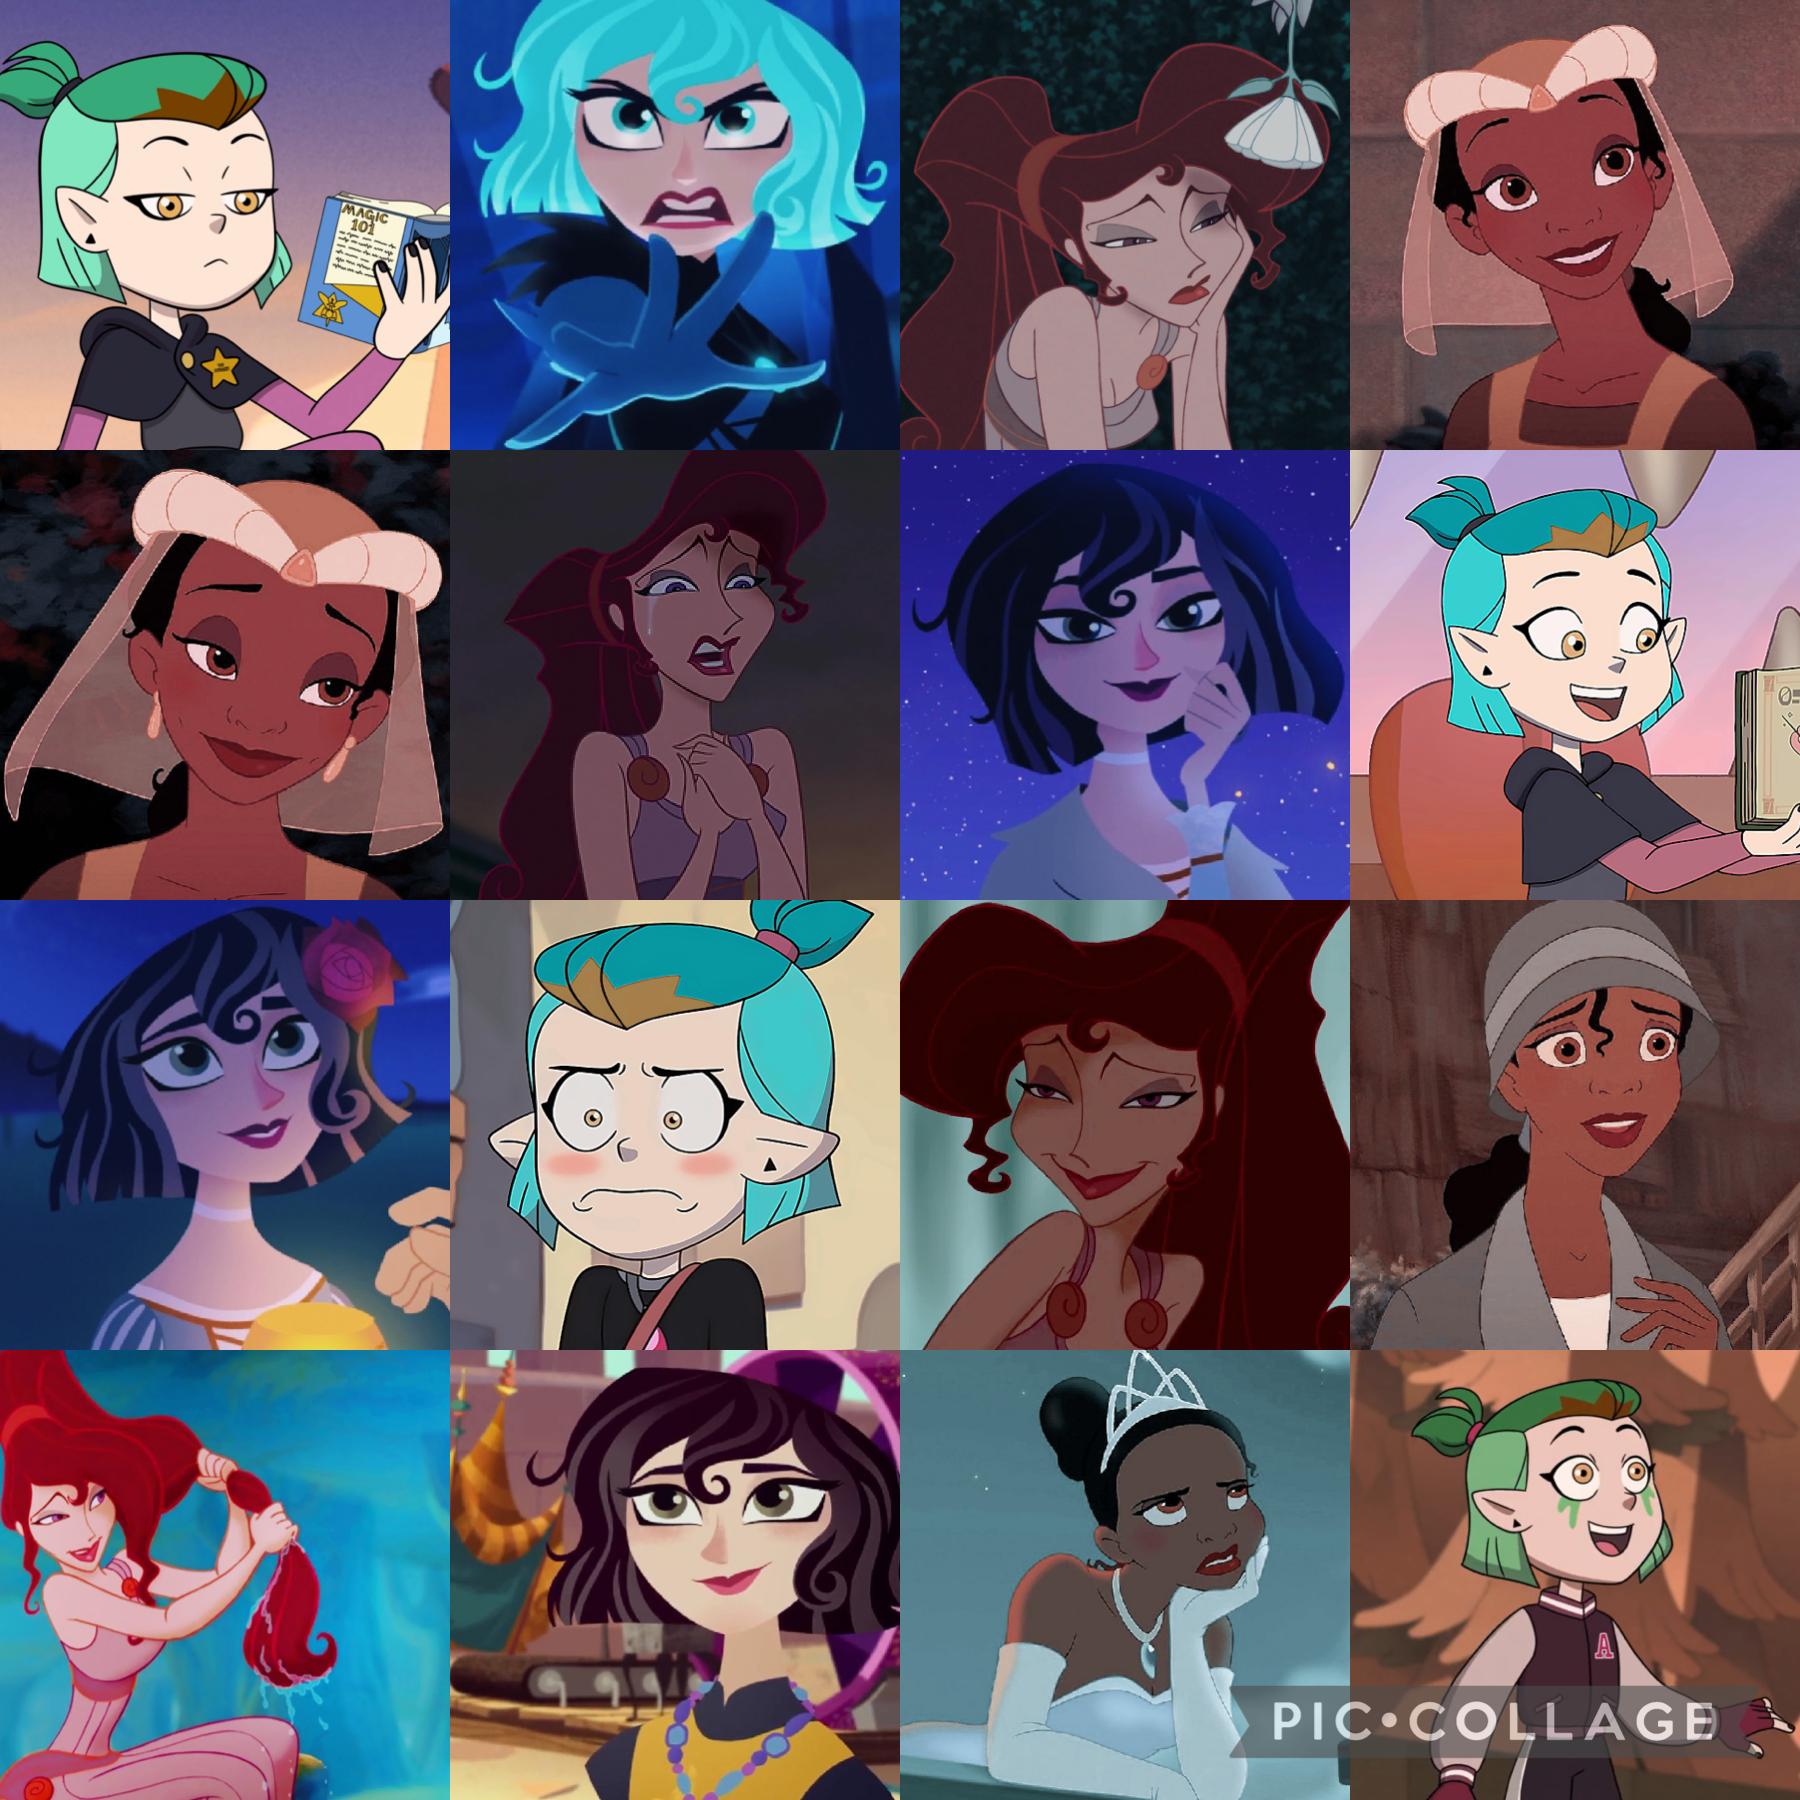 💖TAP💖
These are my 4 favourites Disney characters: 
Tiana (the princess and the frog)
Amity Blight (the owl house)
Cassandra (Tangled the serie)
Megara (Hercules)
I LOVE them, they represent me the most and that’s why they’re my favourites!💖